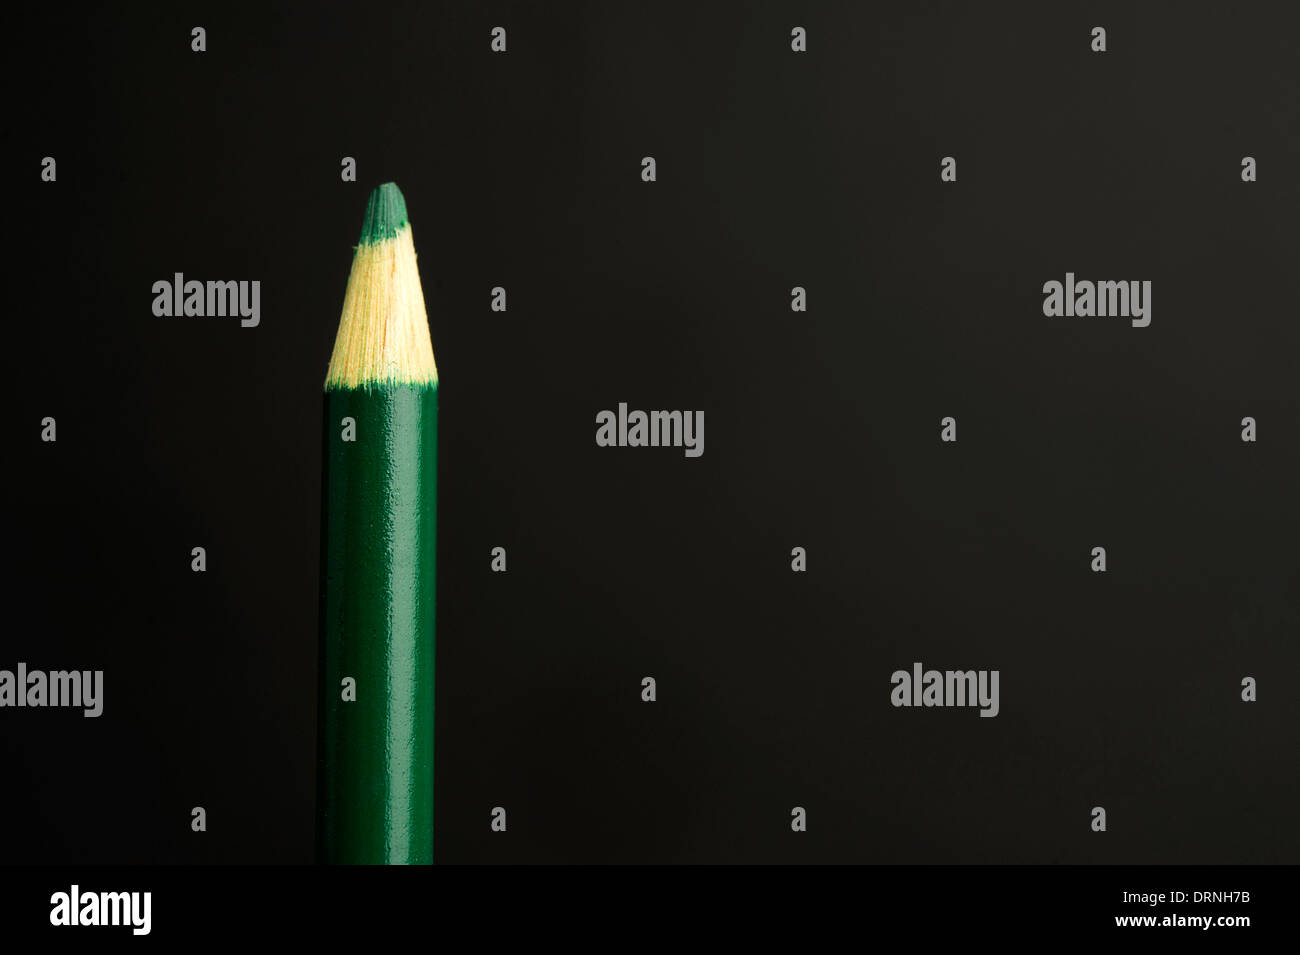 Children's Green pencil crayon on a black background Stock Photo